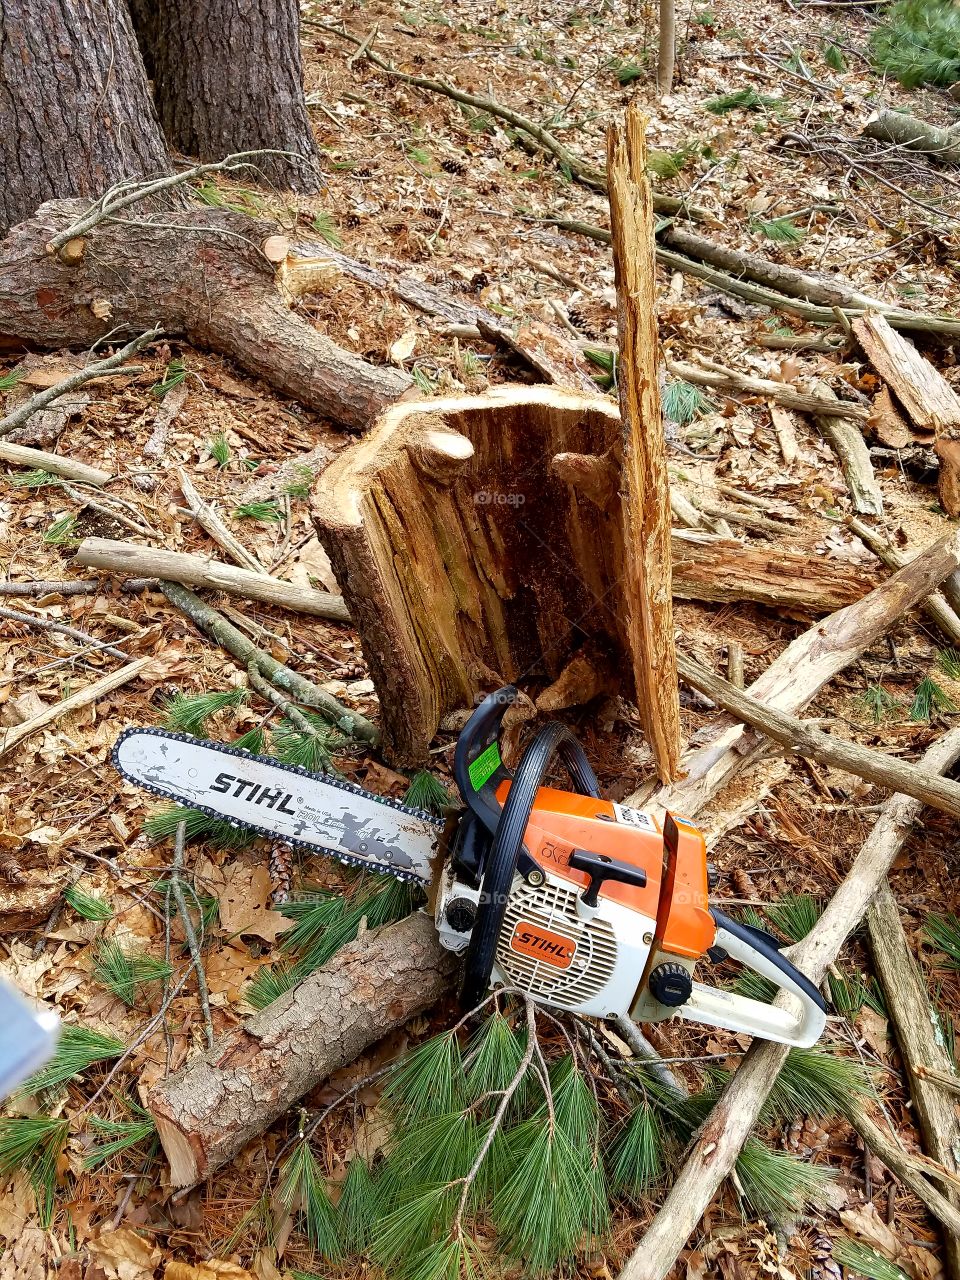 Stihl chainsaw displayed in woods after cutting wood, showing the Stihl name proudly on this older model.